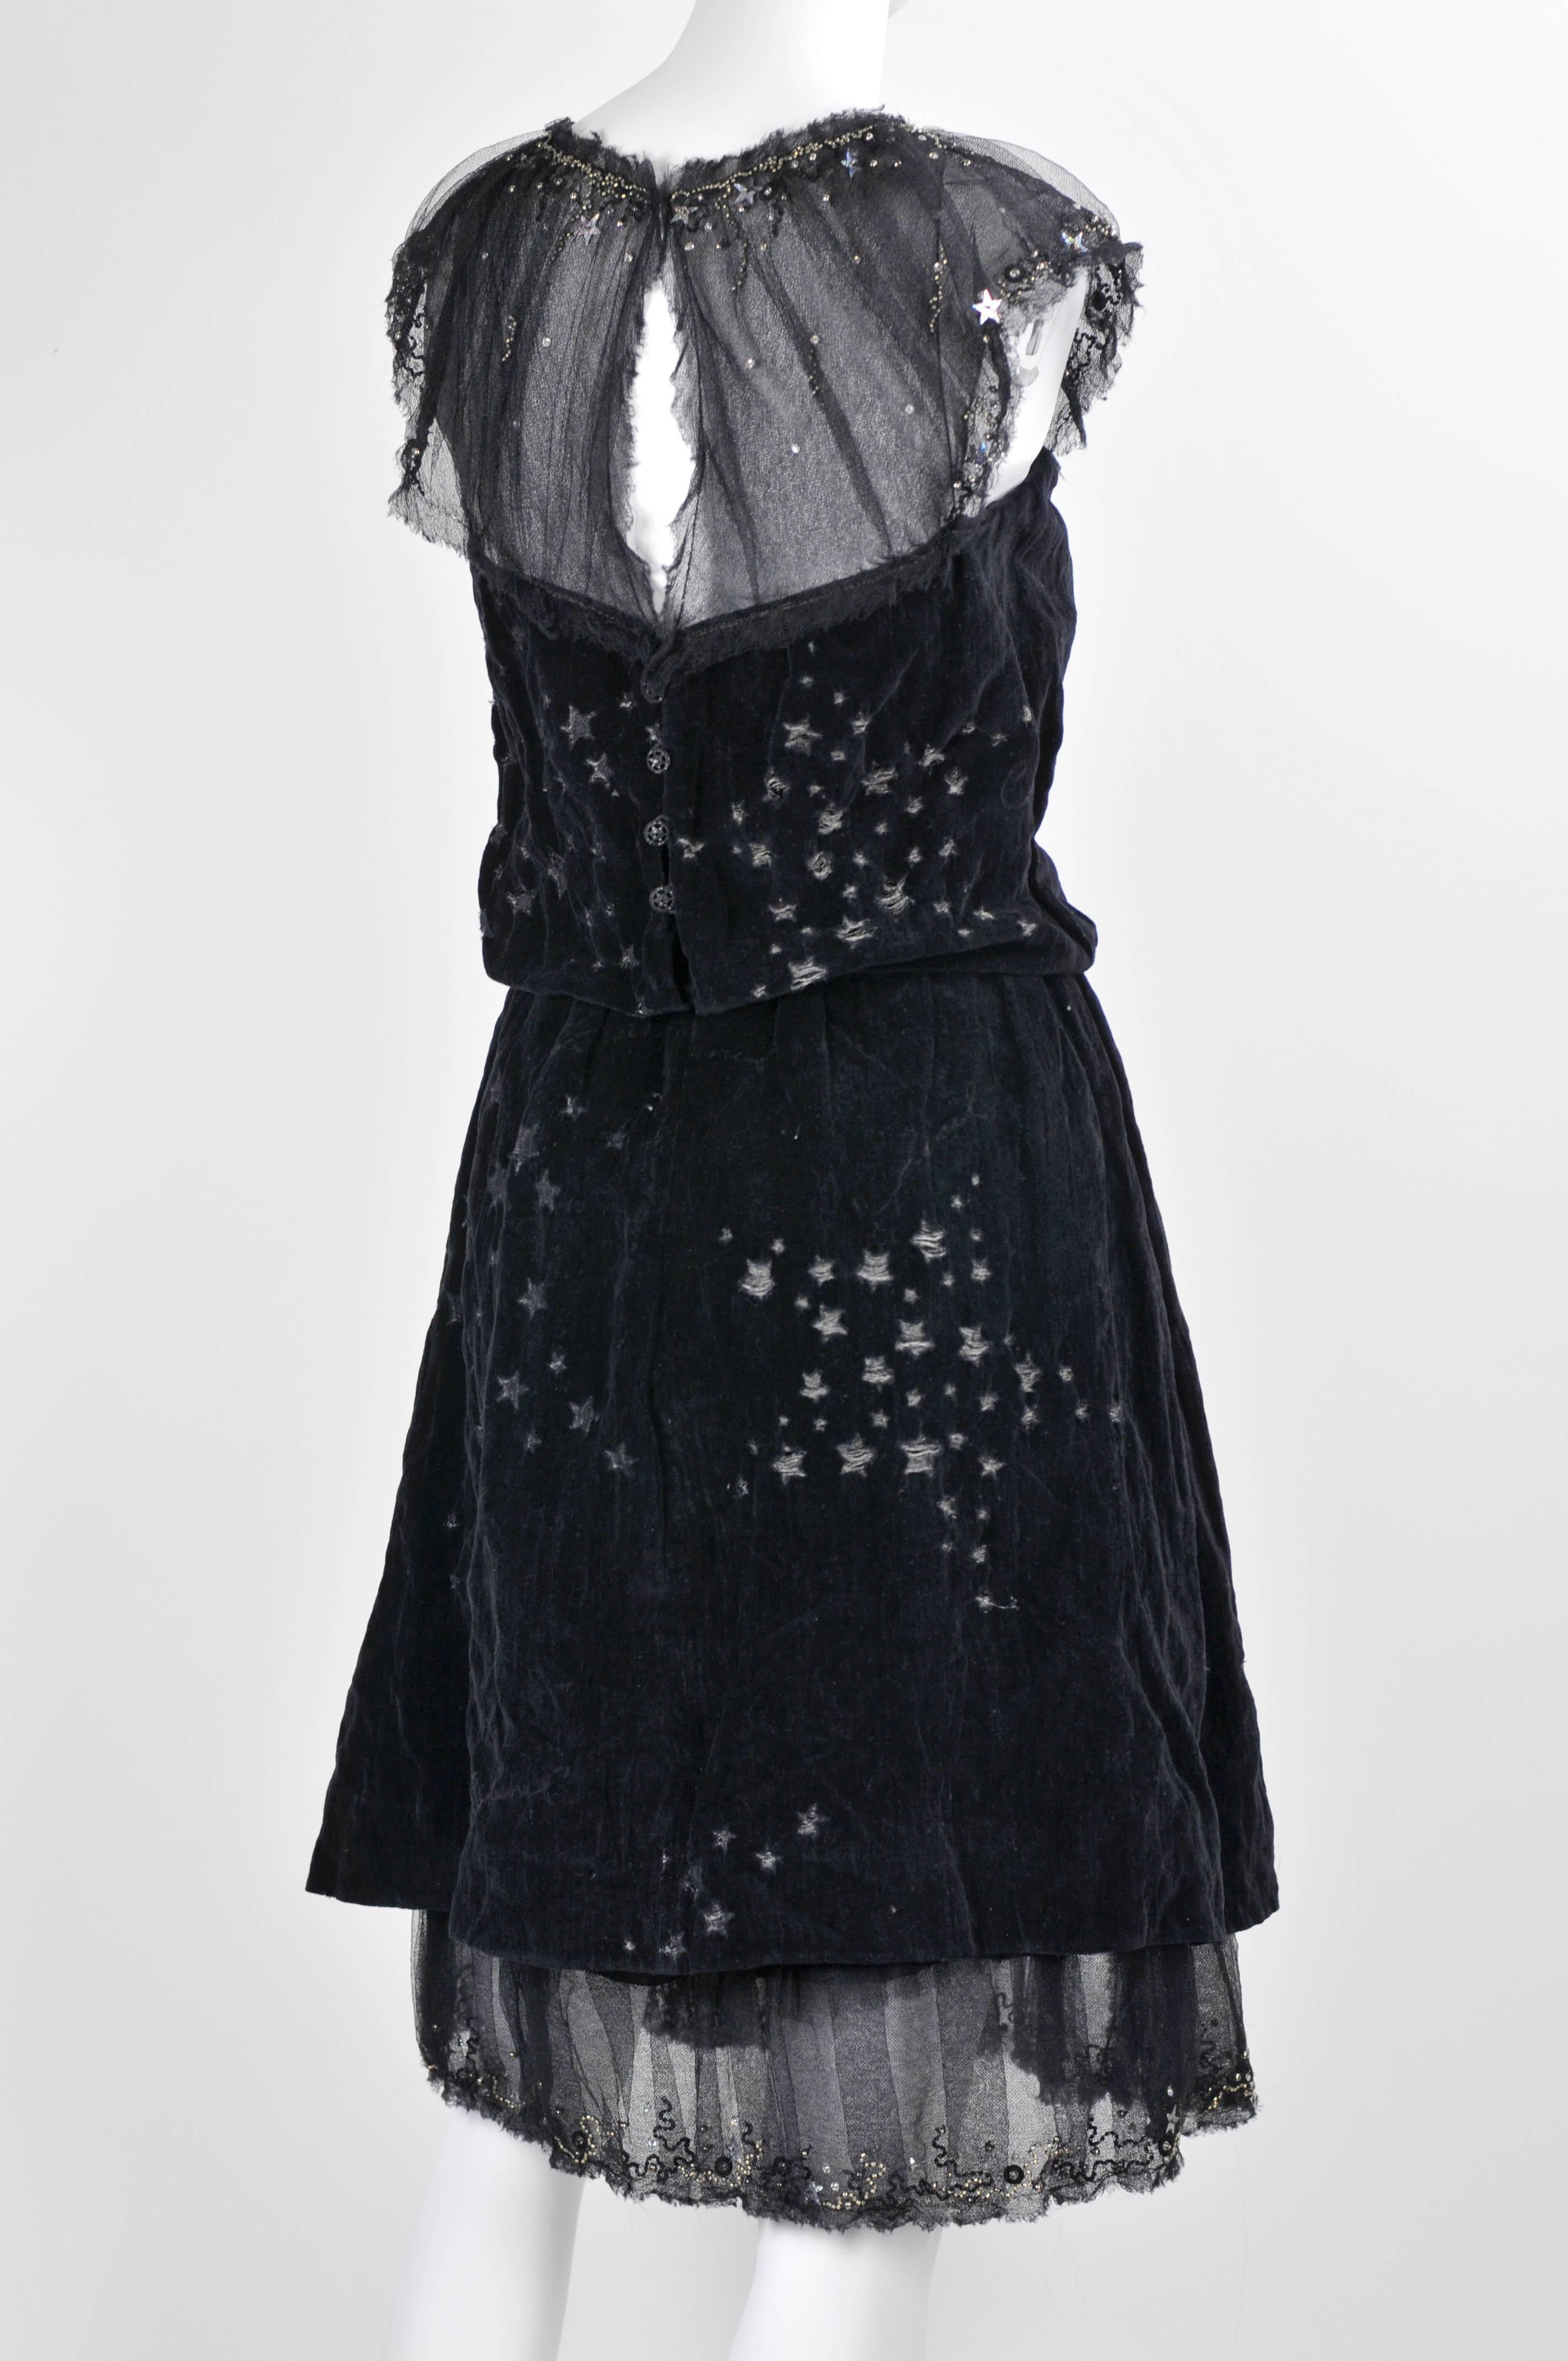 Chanel 2007A Demi Couture  Black Velvet Evening Dress w/ Beading and Stars FR 34 For Sale 4